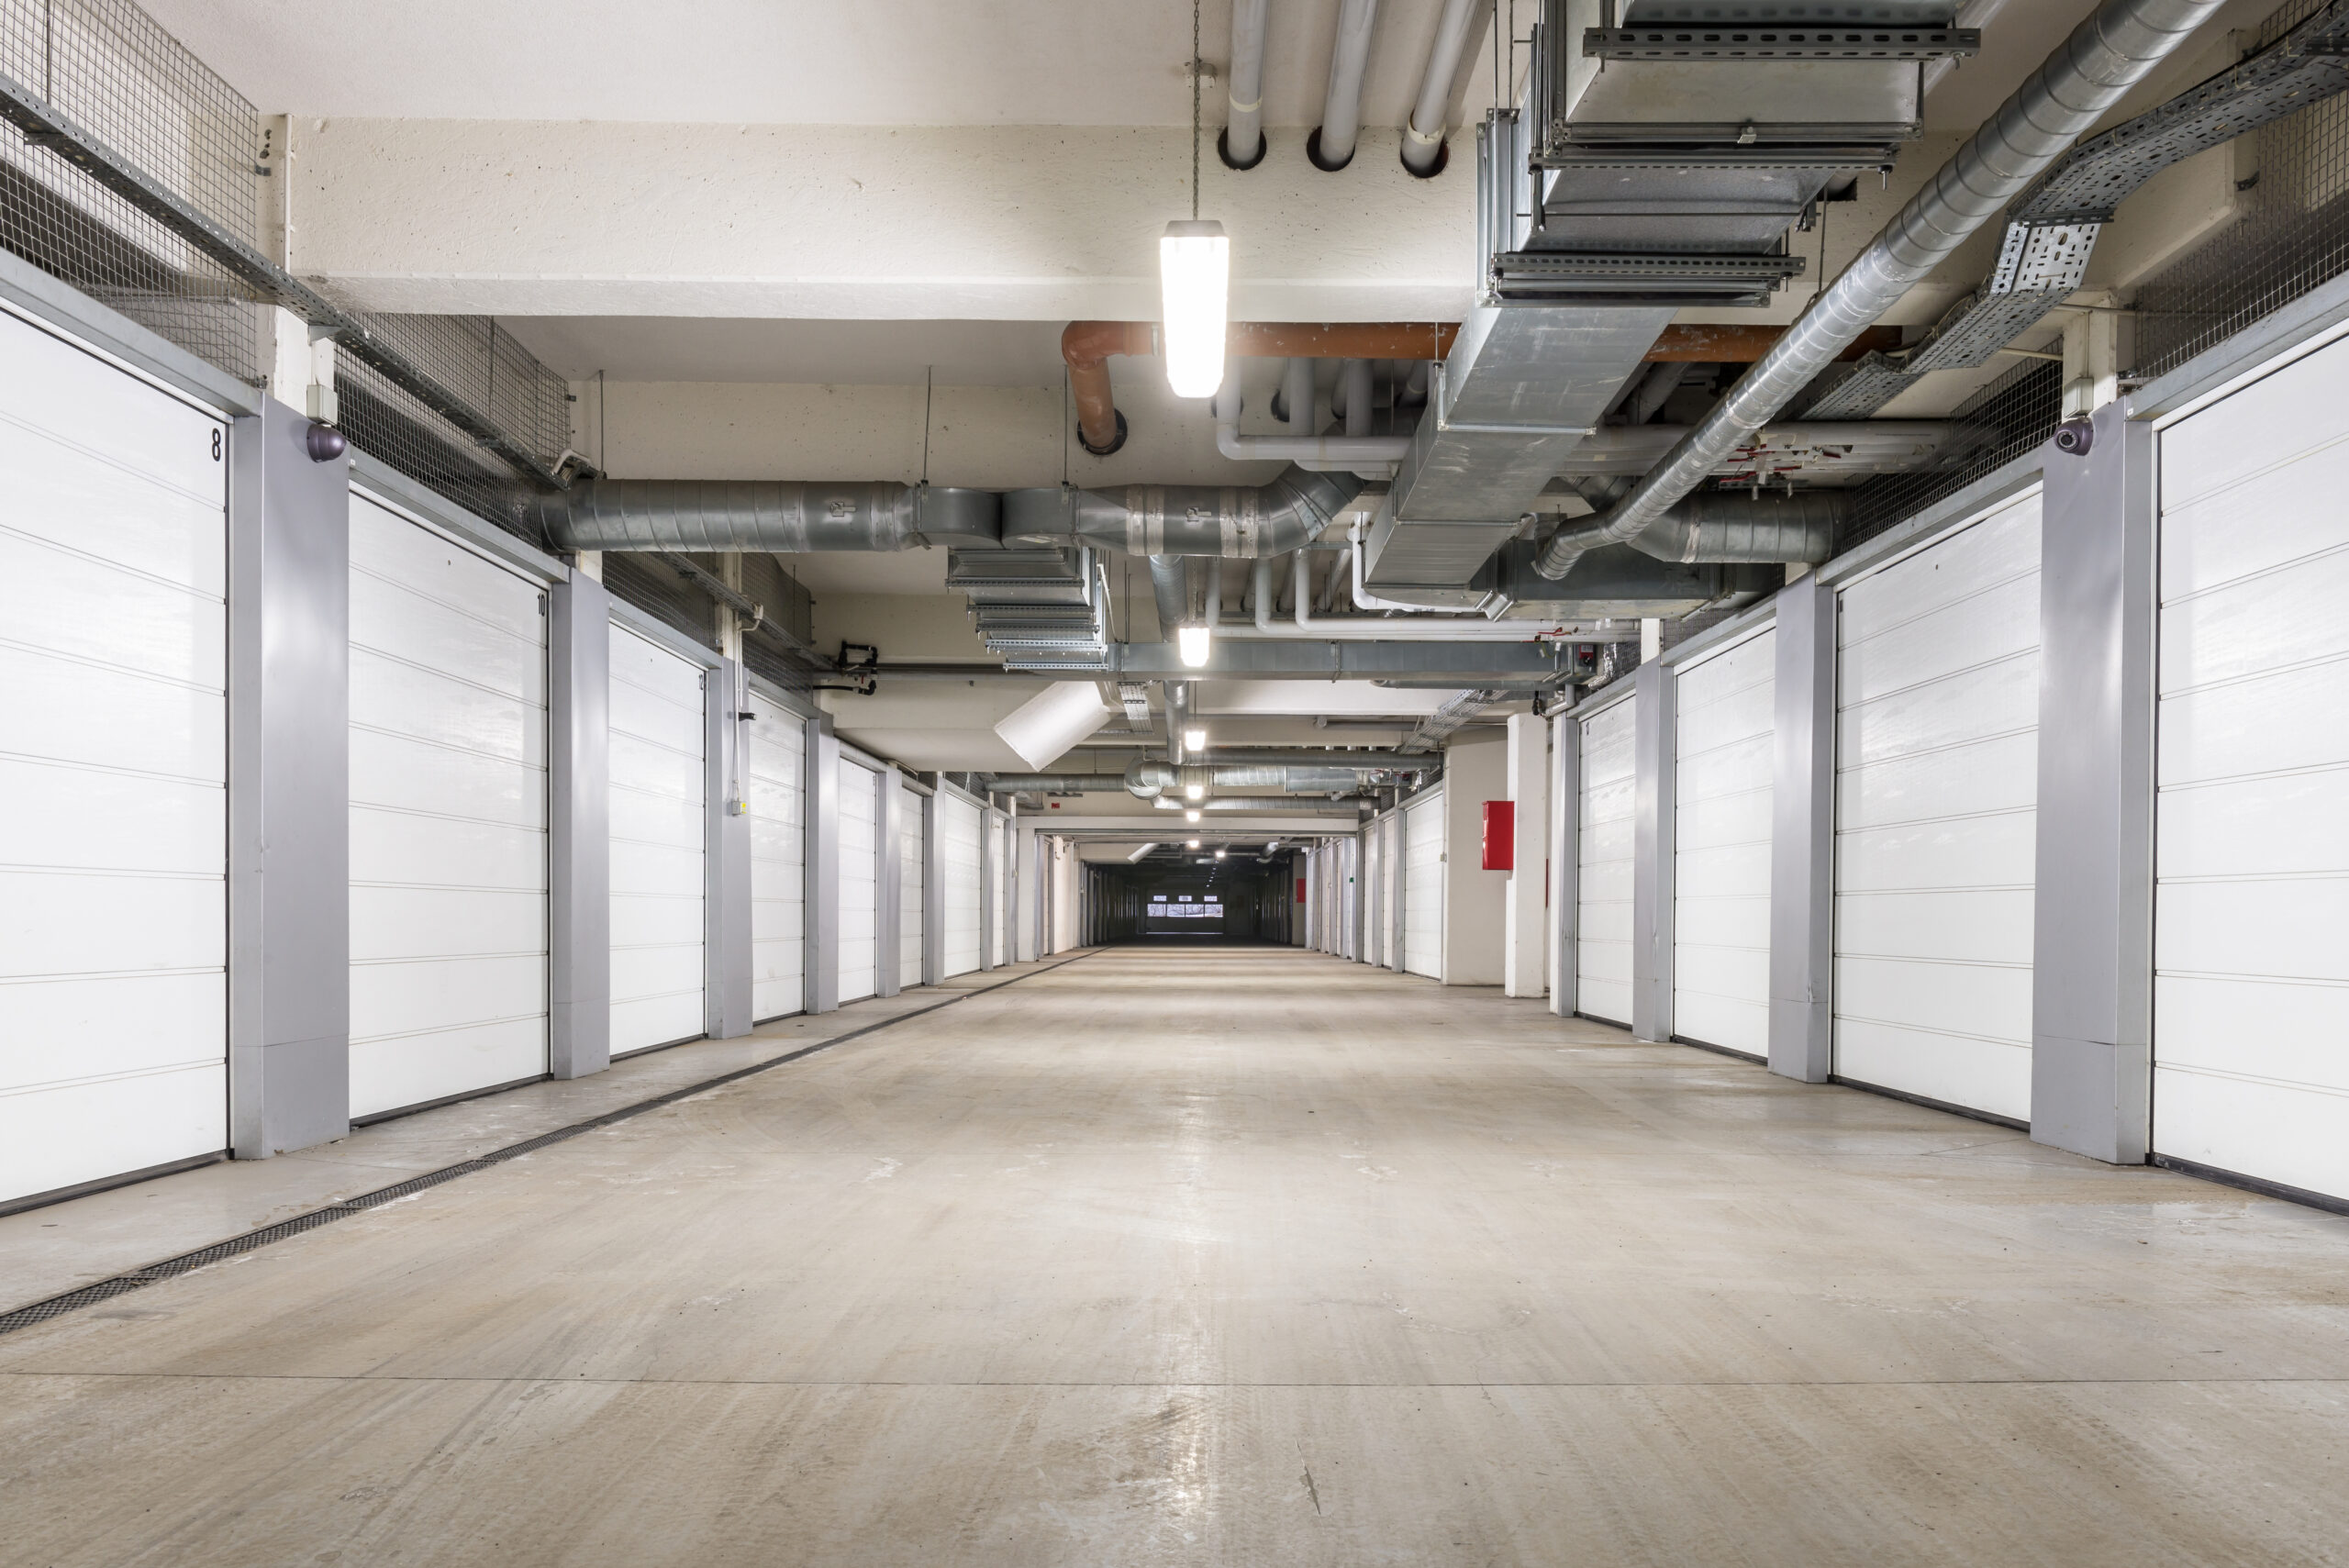 Underground,European,Storage,And,Parking,Facility,With,Numbered,Bays.